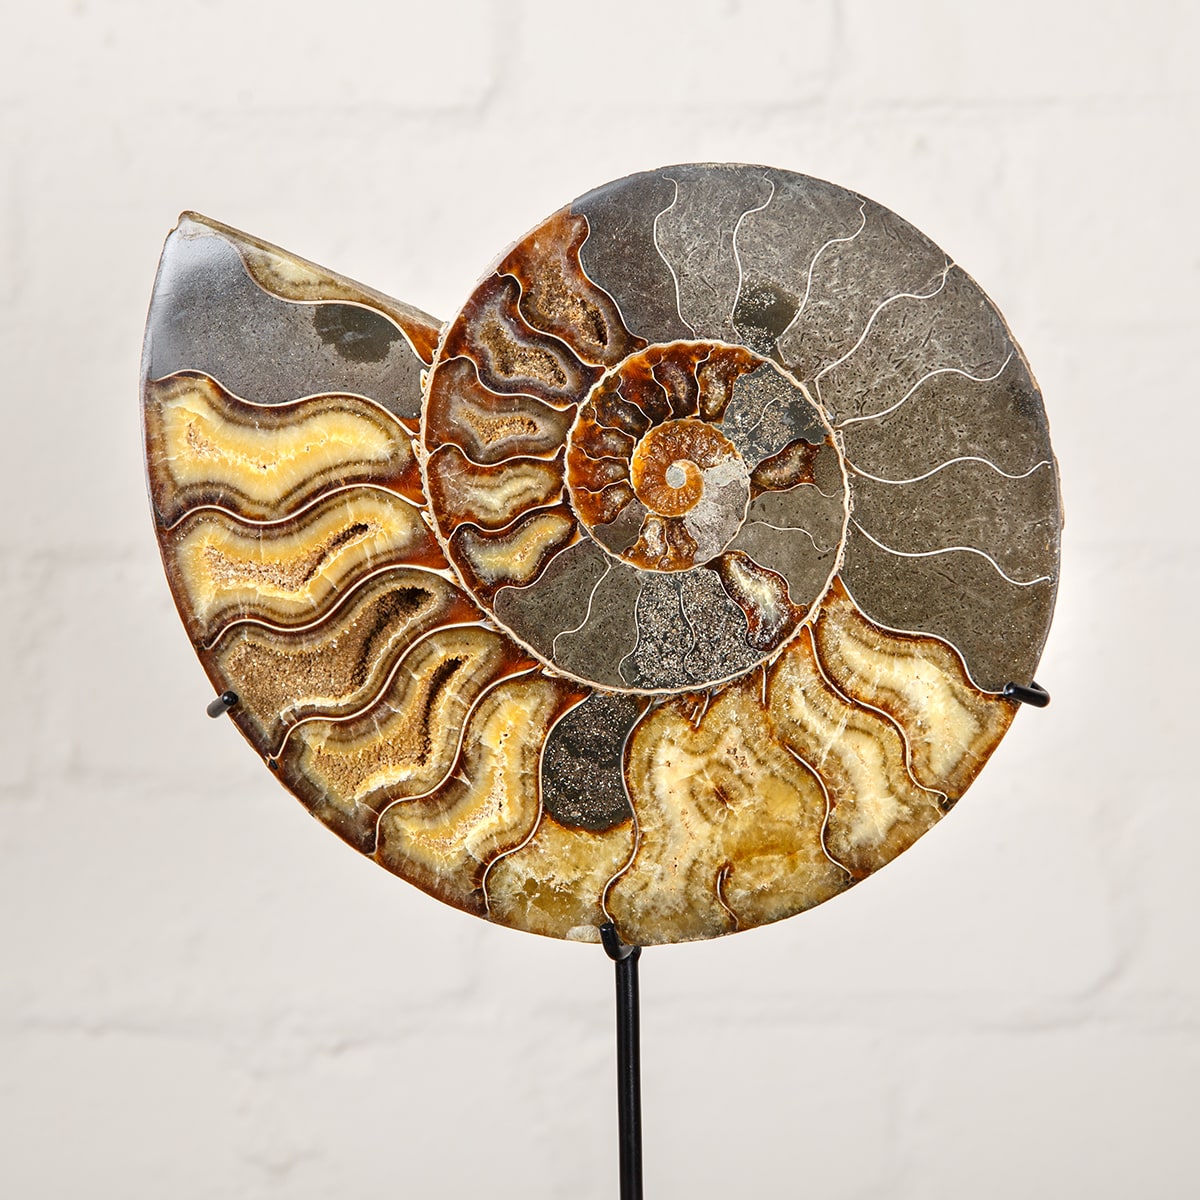 Huge 9.4 inch Polished & Sliced Ammonite Fossil on Stand (Cleoniceras sp)